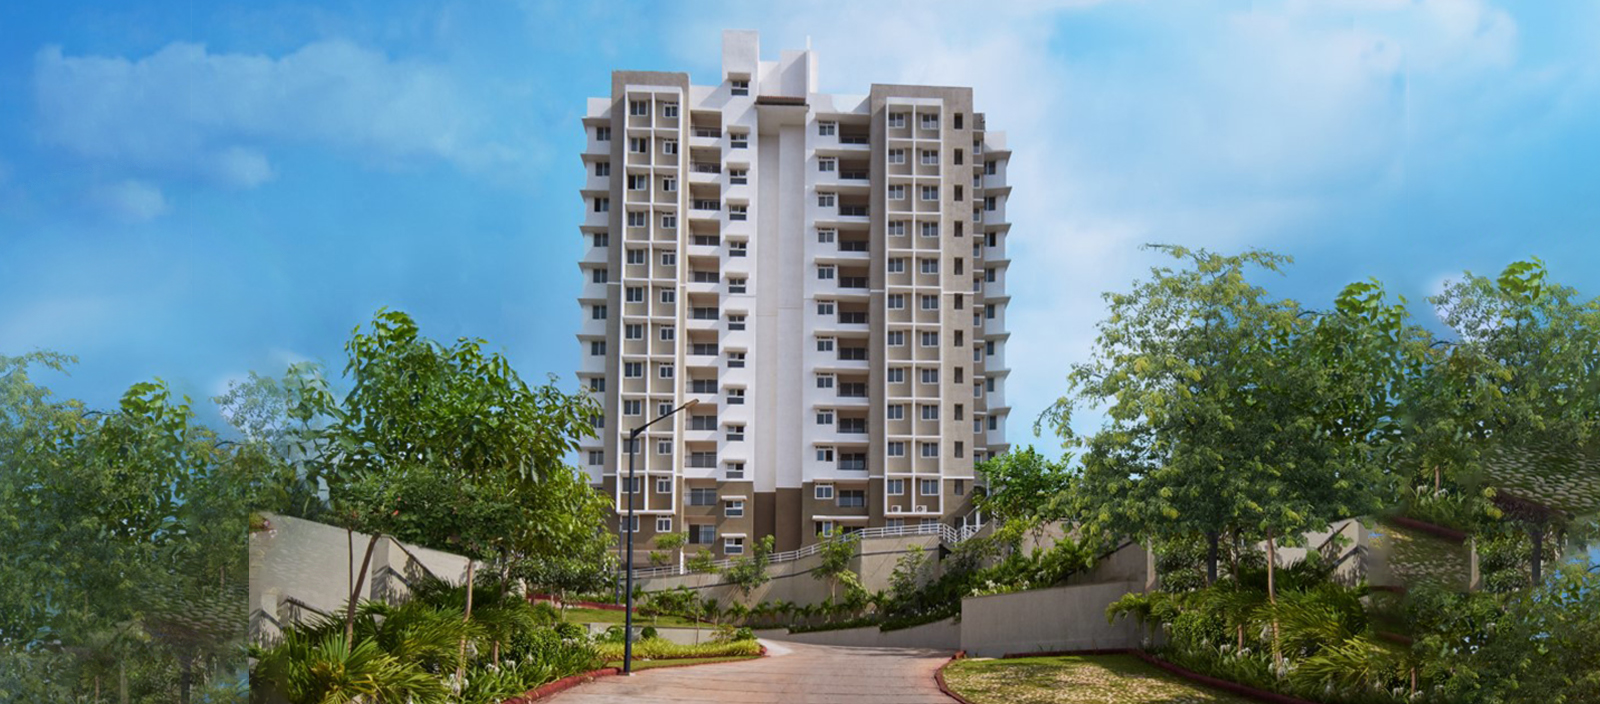 Apartments for Sale in Mangalore | flats in mangalore